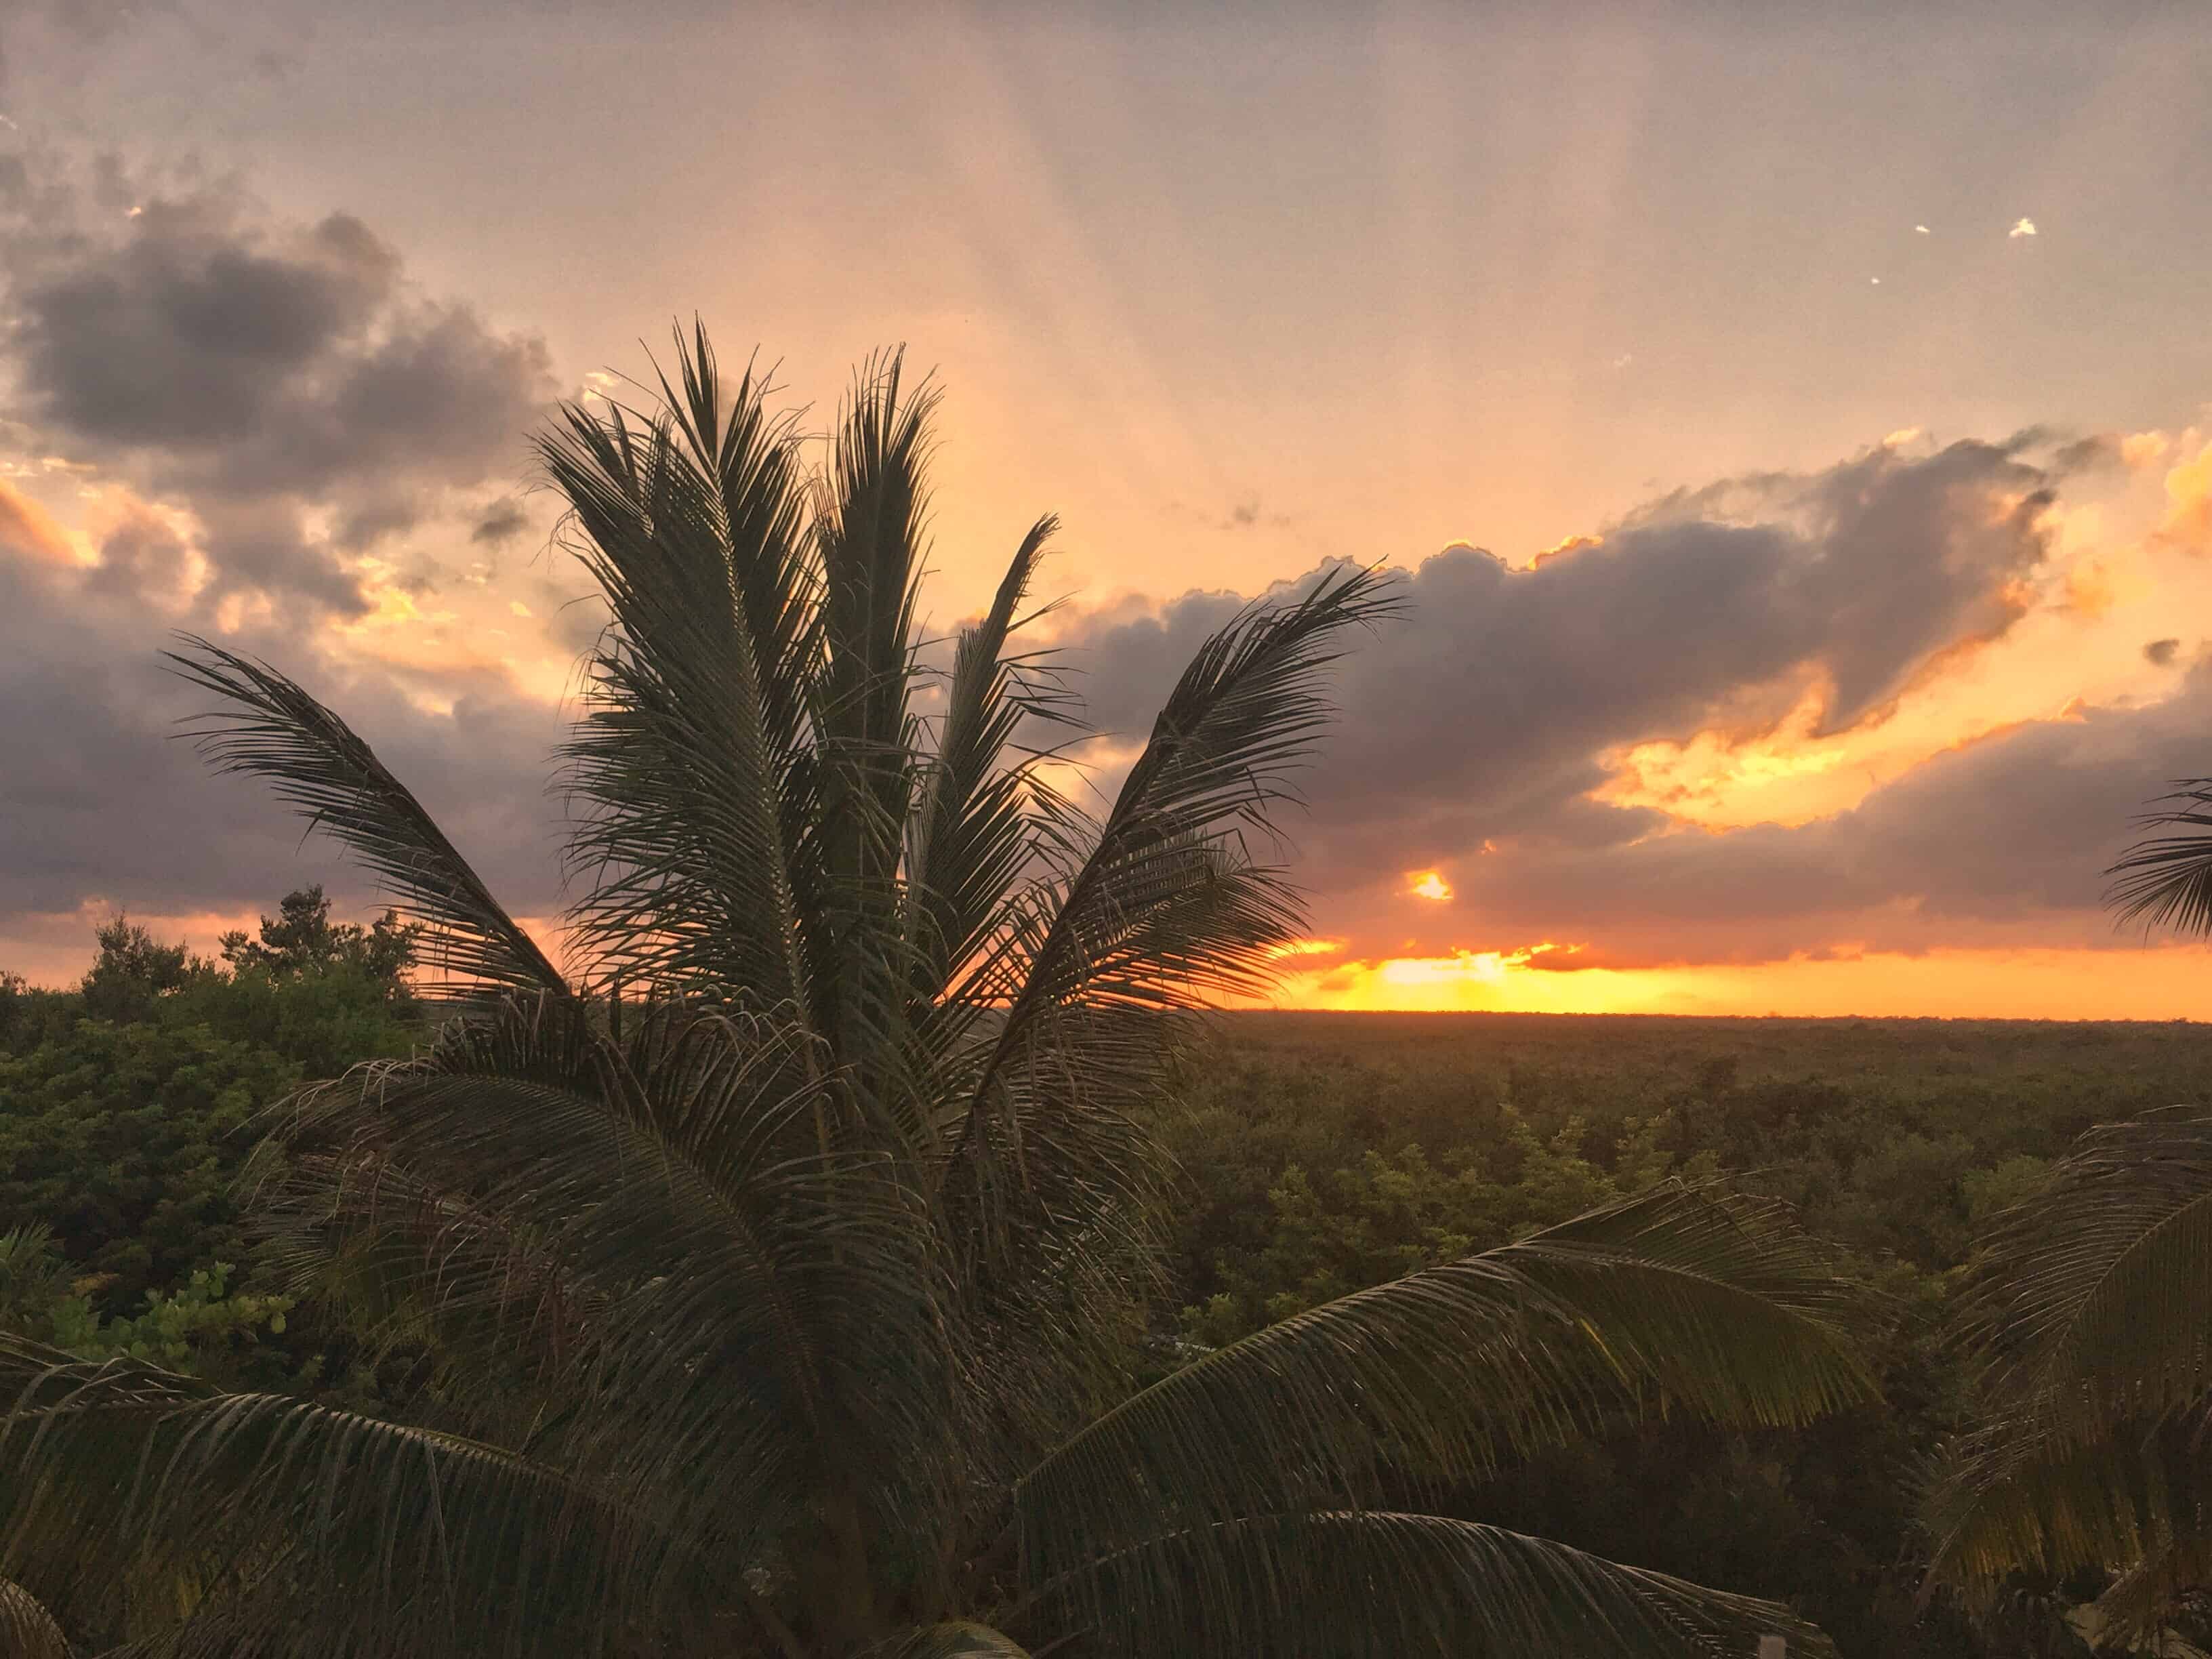 Sunset over a view filled with palmtrees